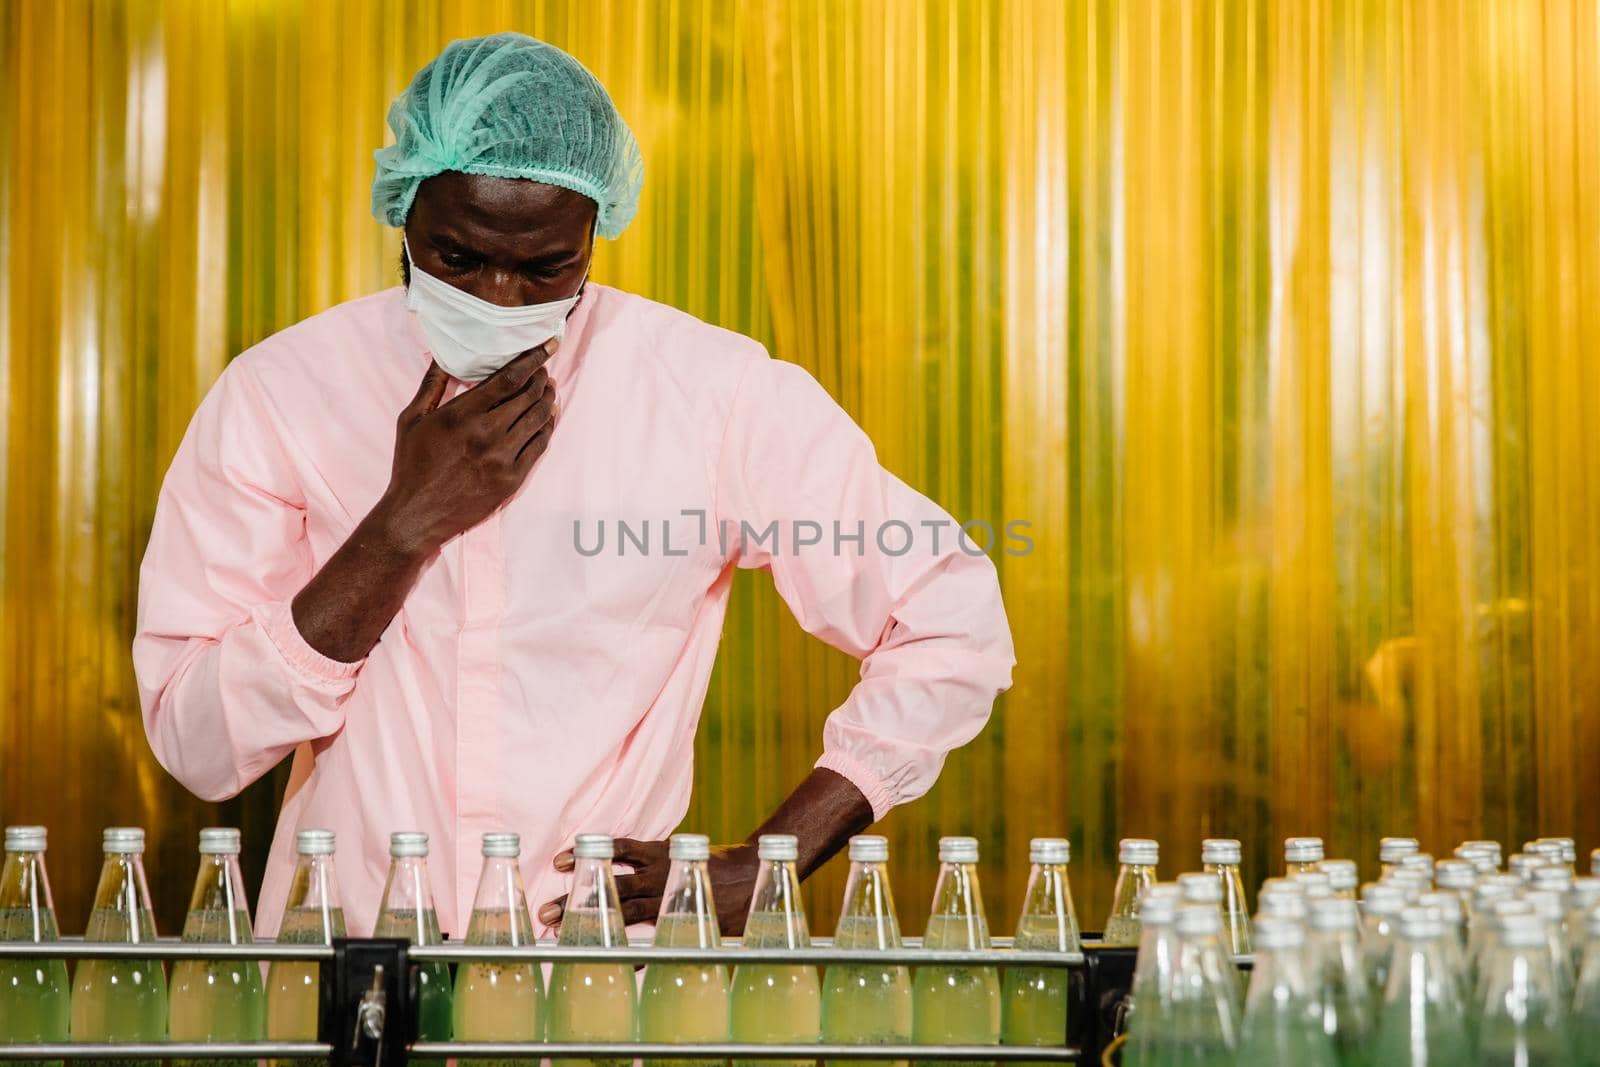 African Black man worker labor working in food and drink industry factory with hygiene work fruit juice production line inspector staff.